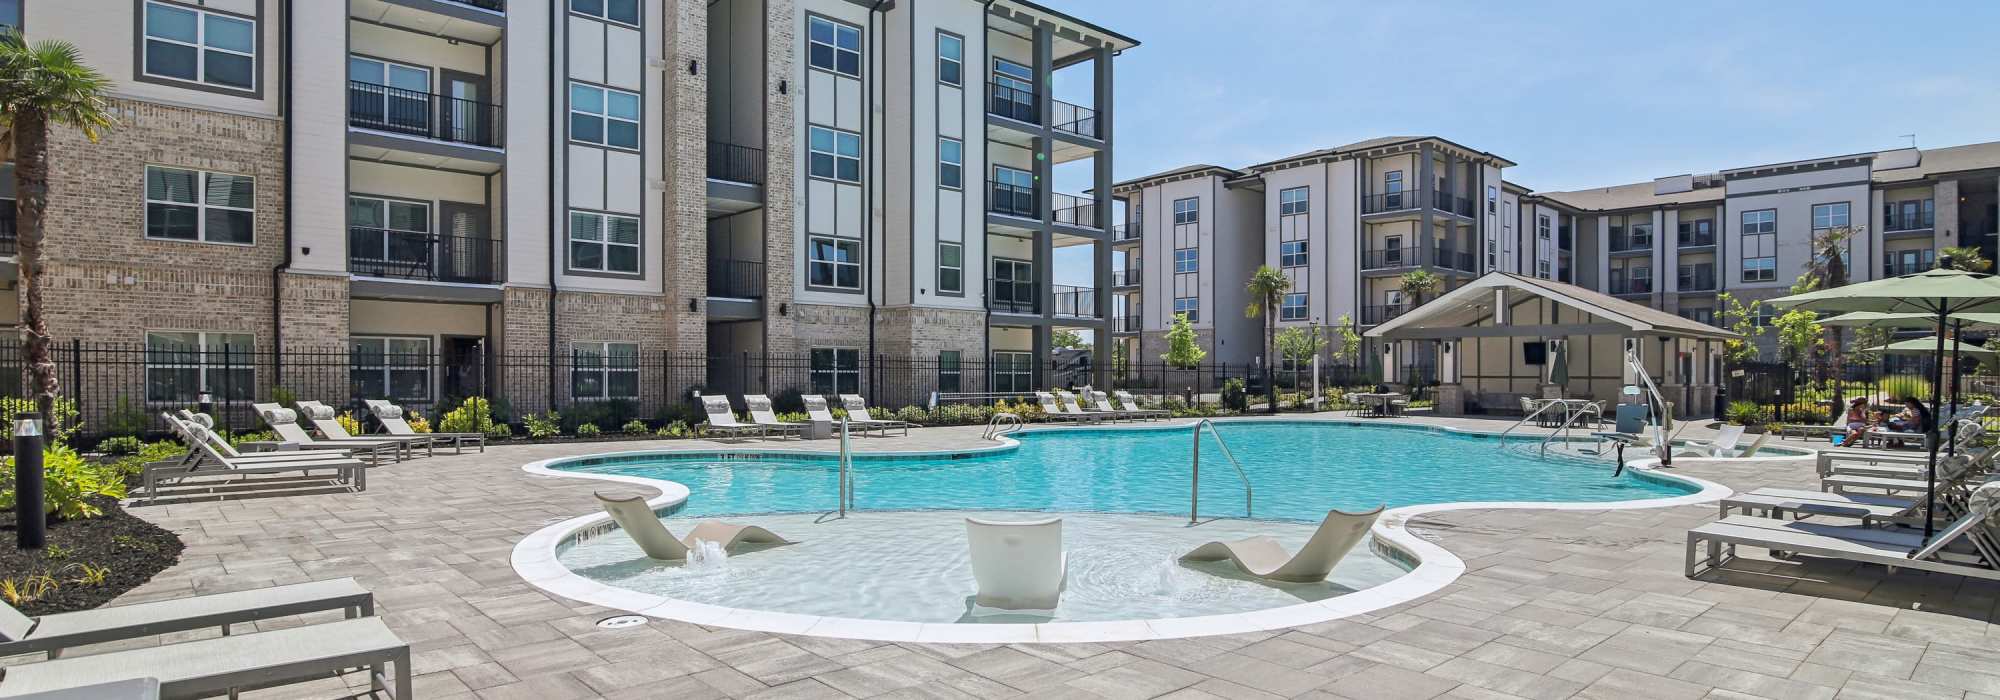 Resort style swimming pool and sundeck lounge chairs at Somerset in McDonough, Georgia